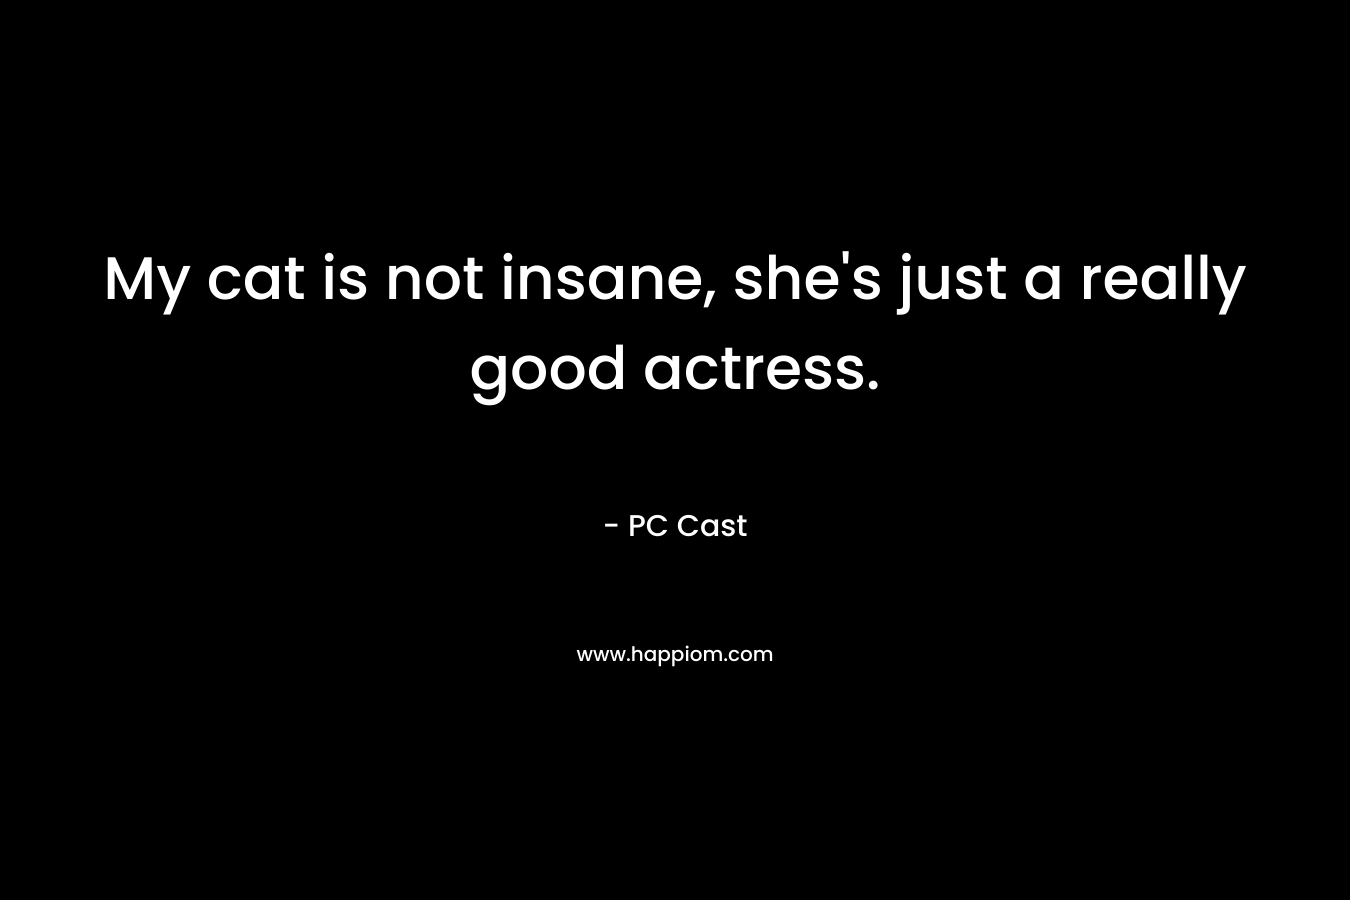 My cat is not insane, she’s just a really good actress. – PC Cast